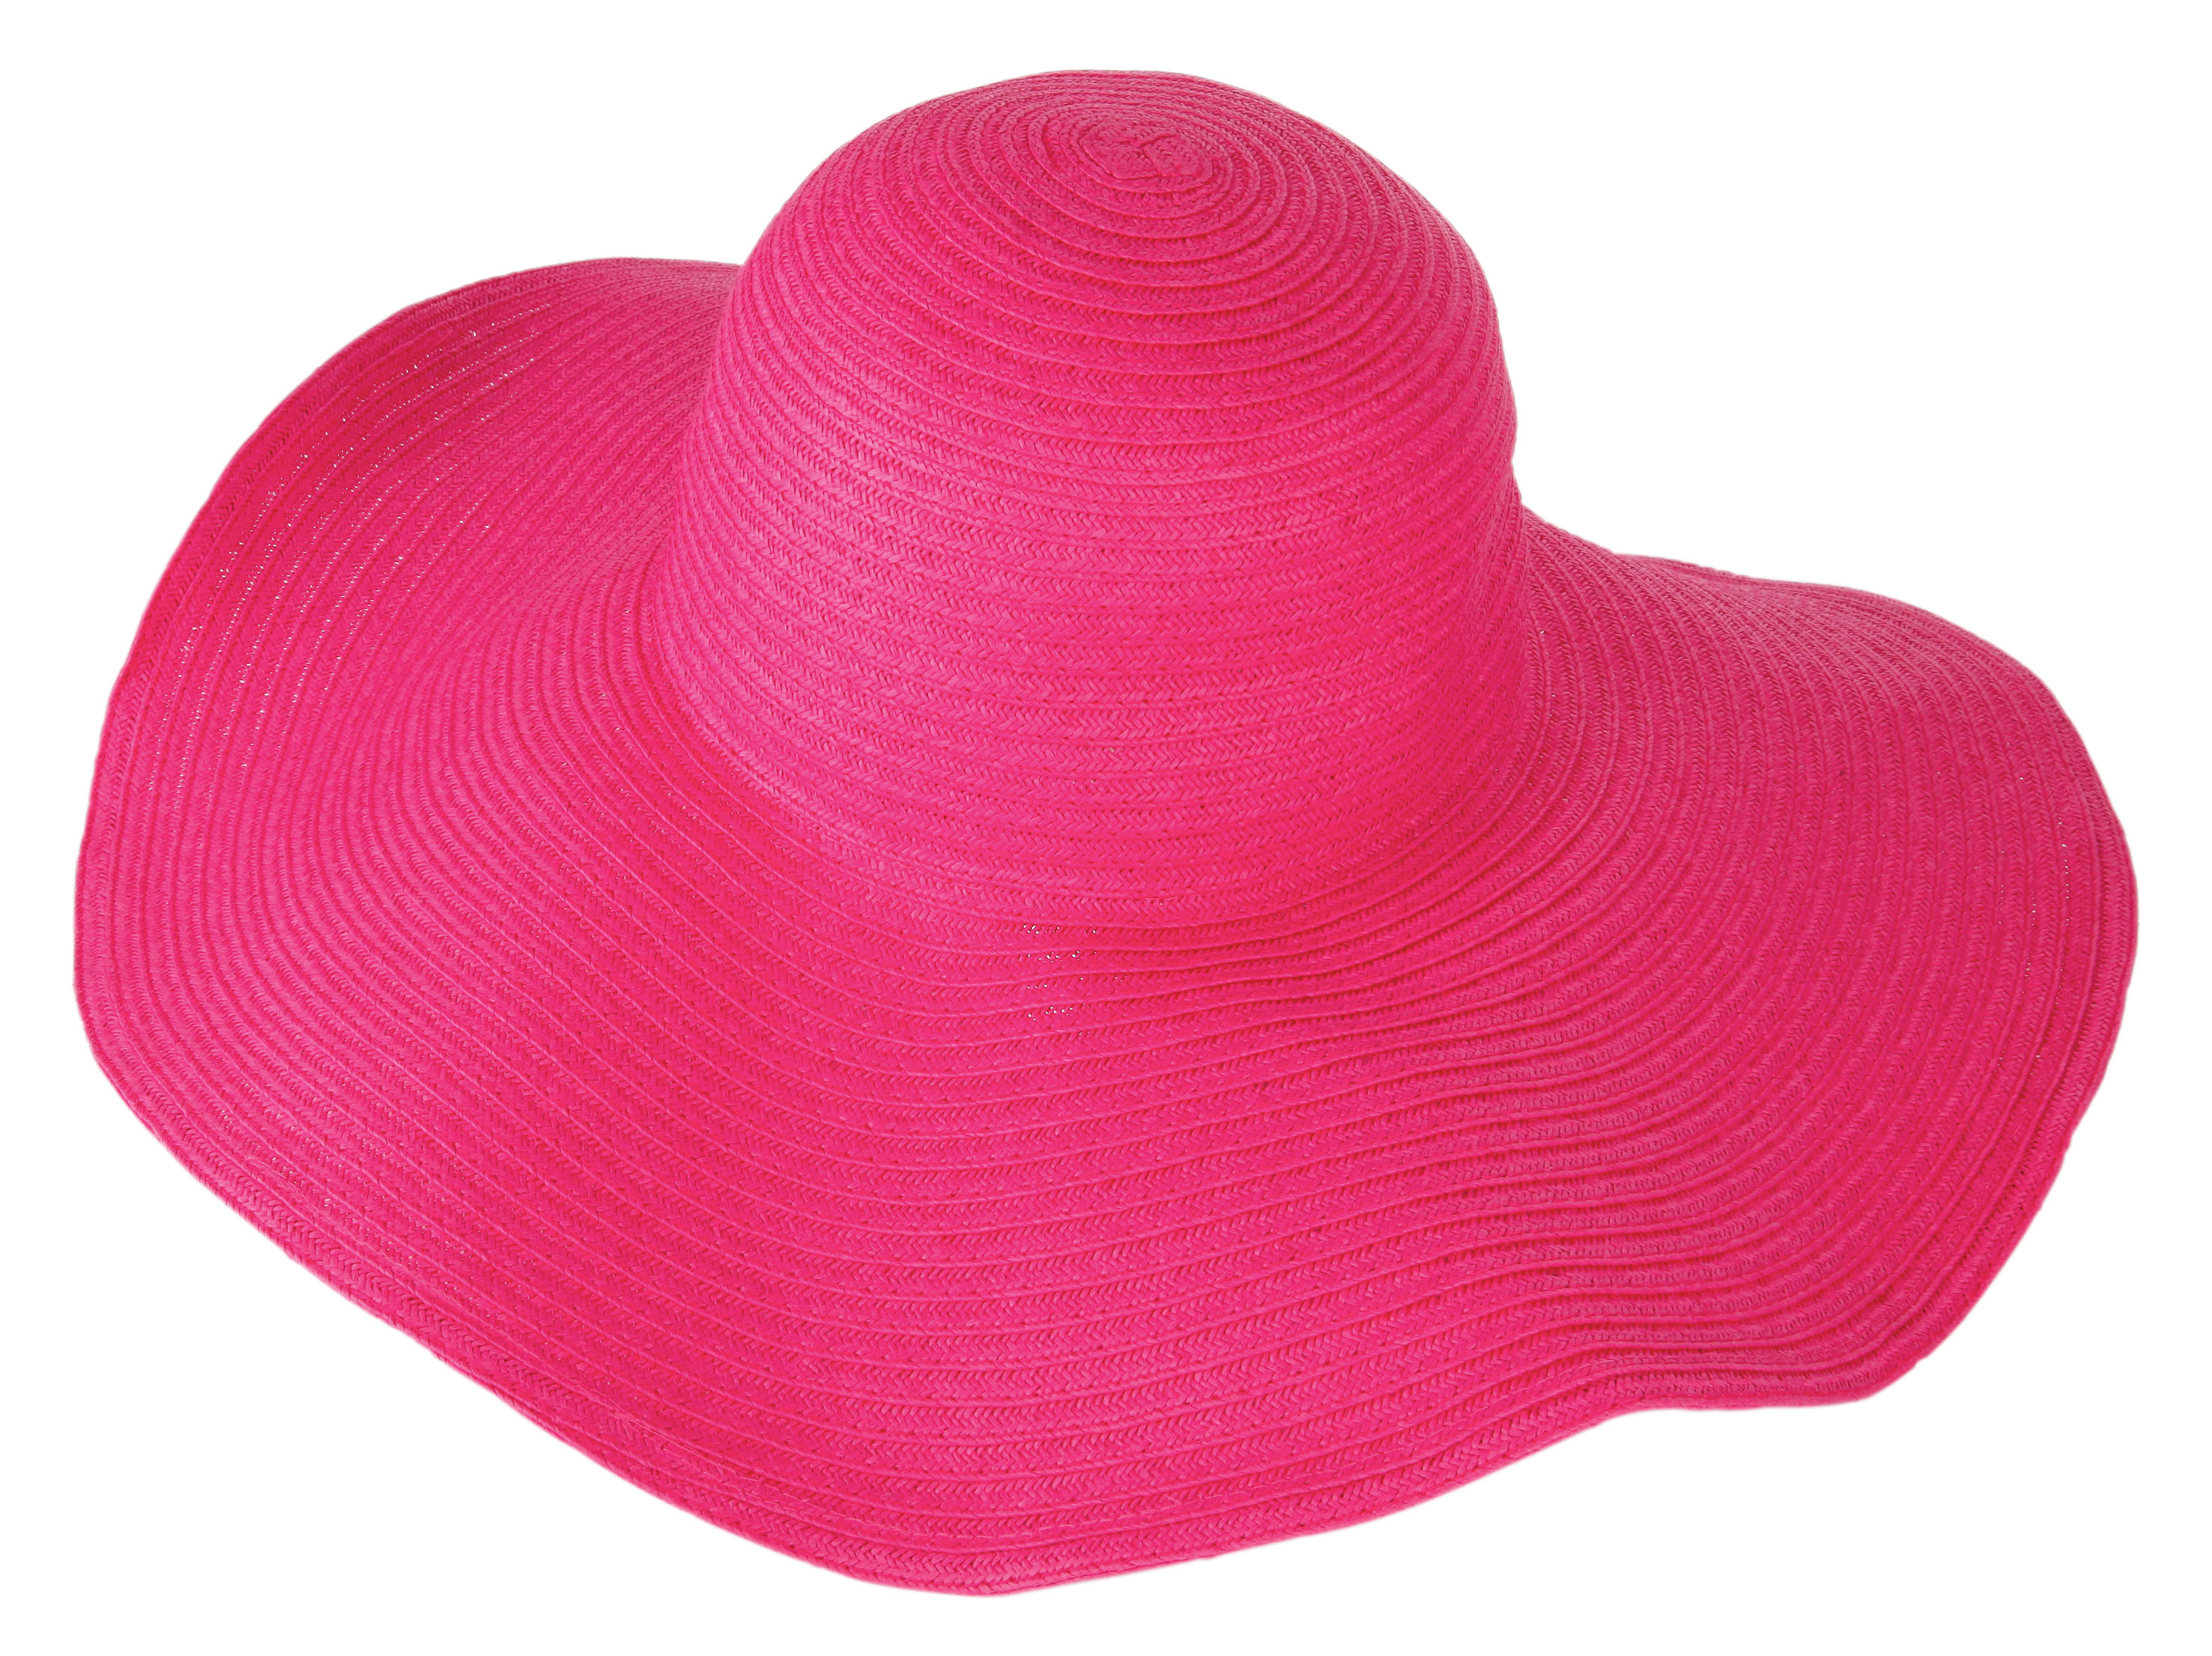 Hat next. S11-61mini шляпа. David and young Bell floppy hat 44298604.